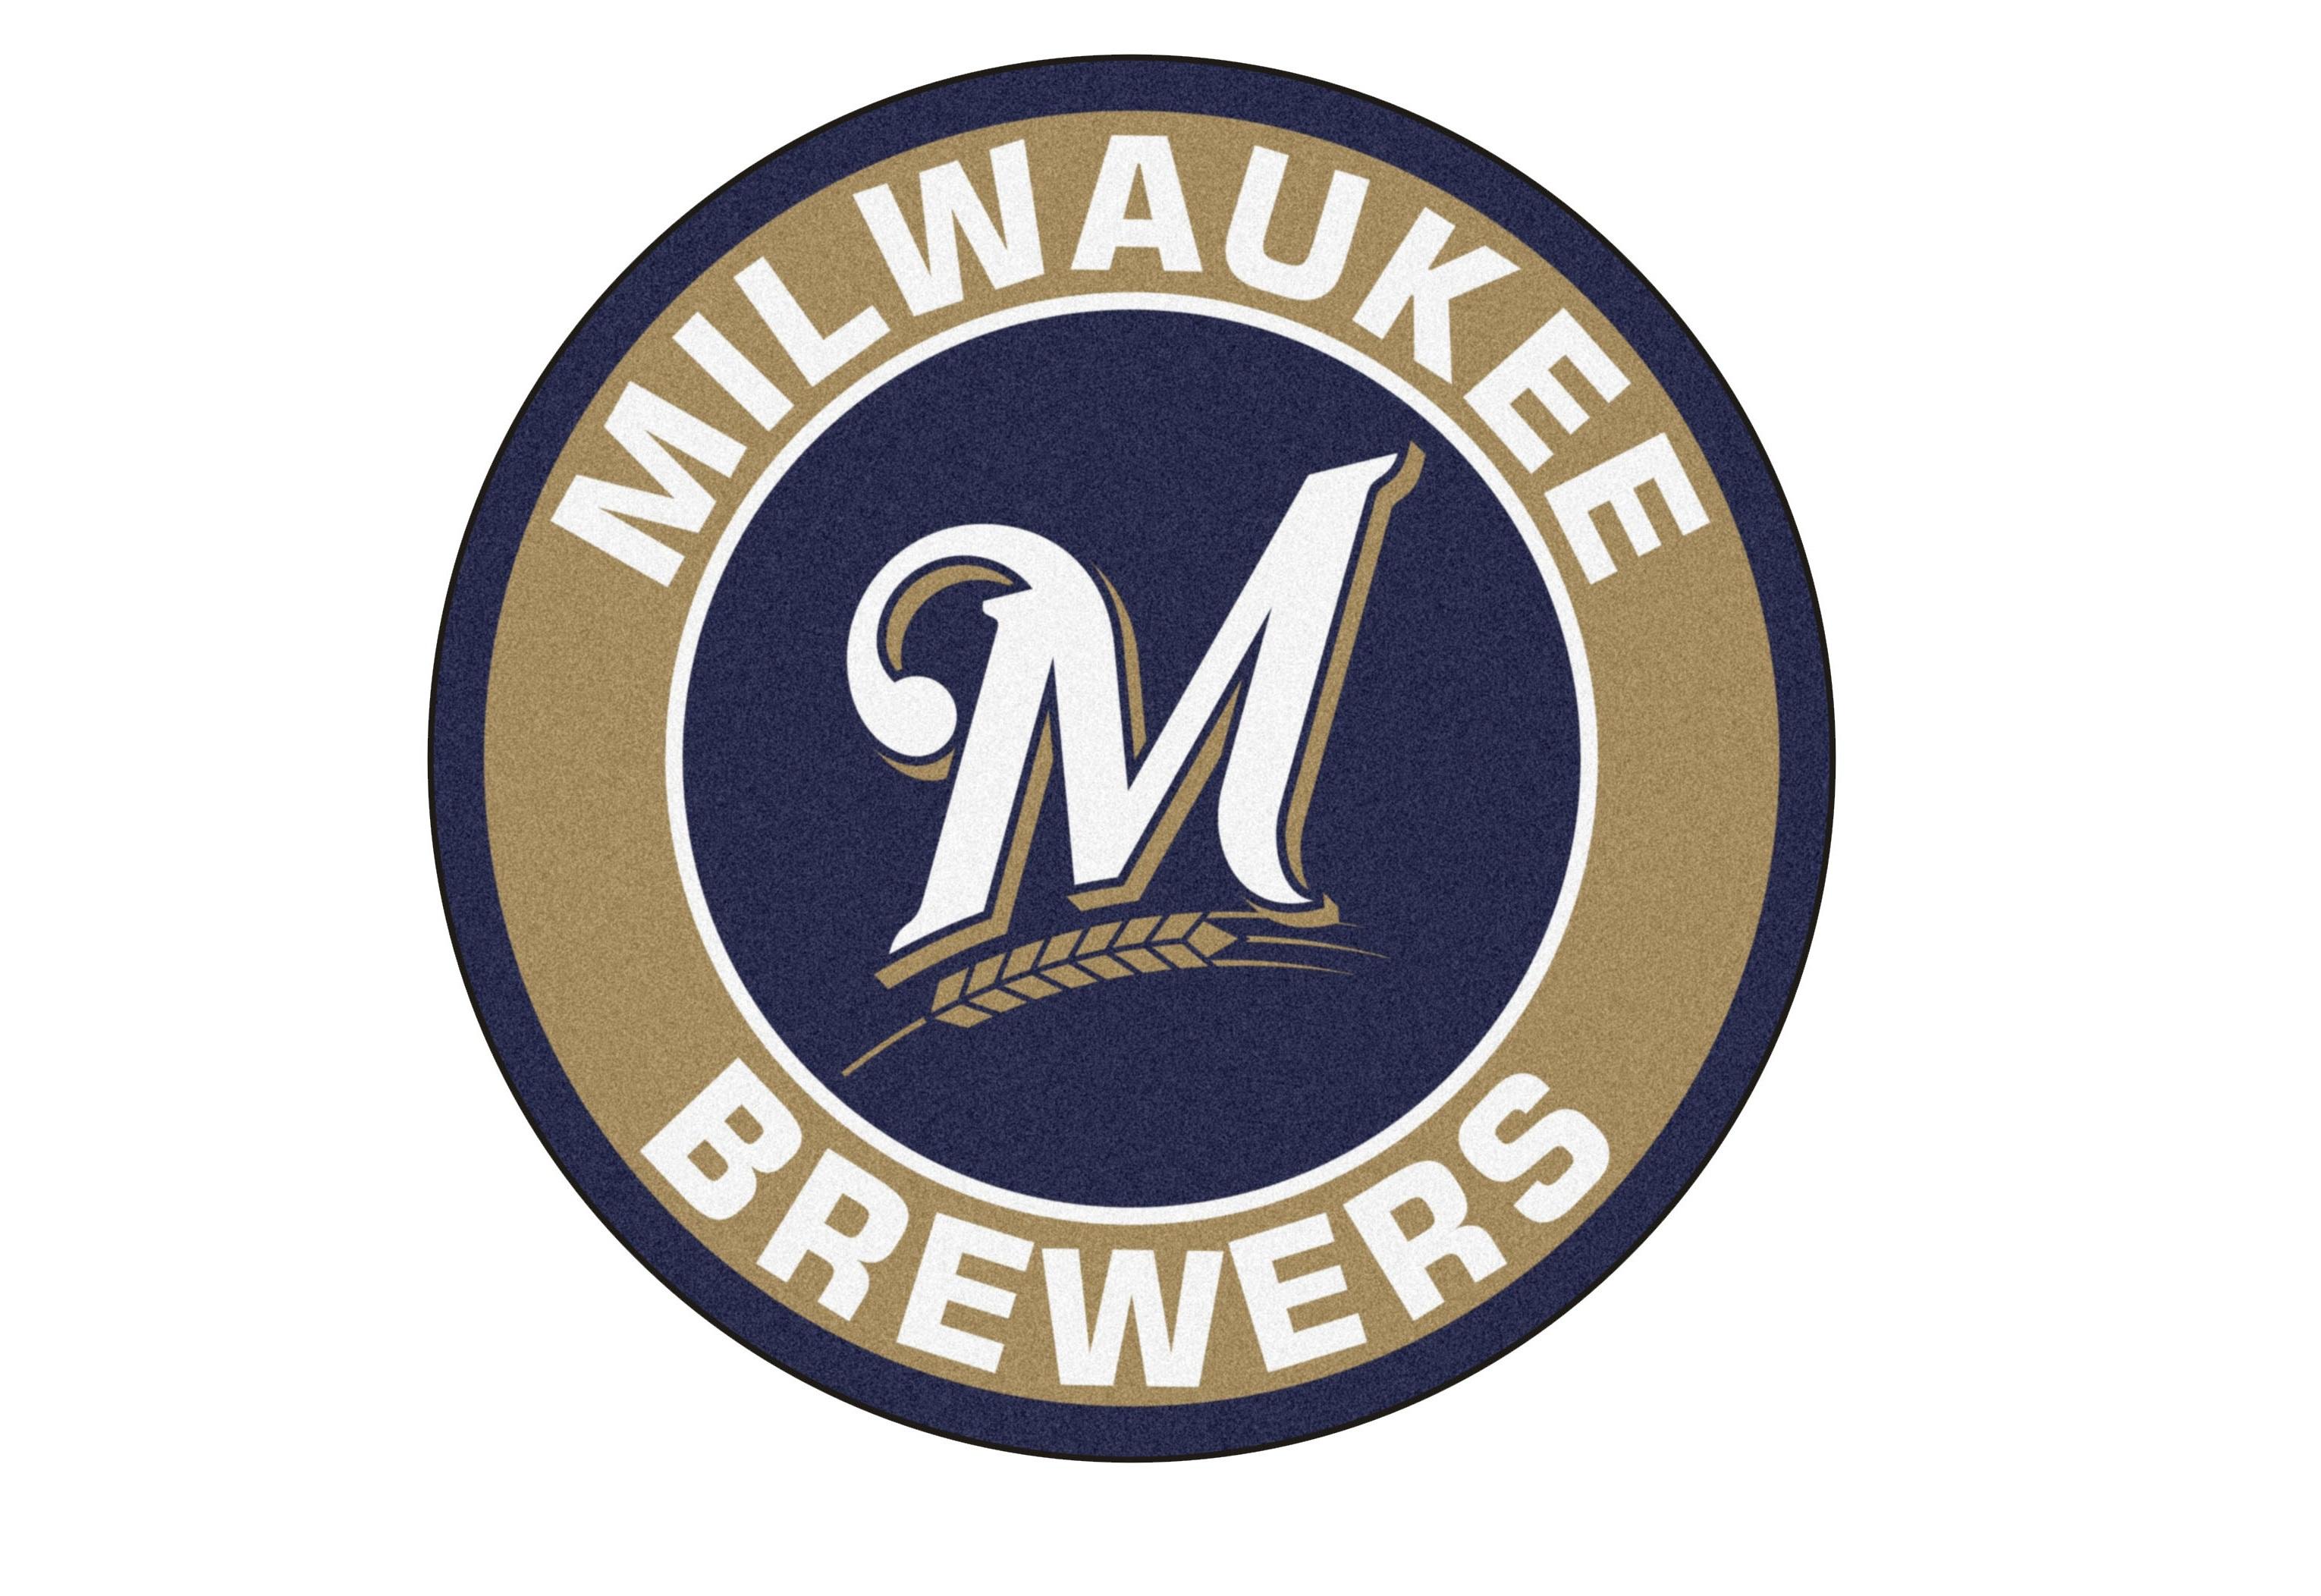 Milwaukee Brewers Wallpaper Image Photo Picture Background